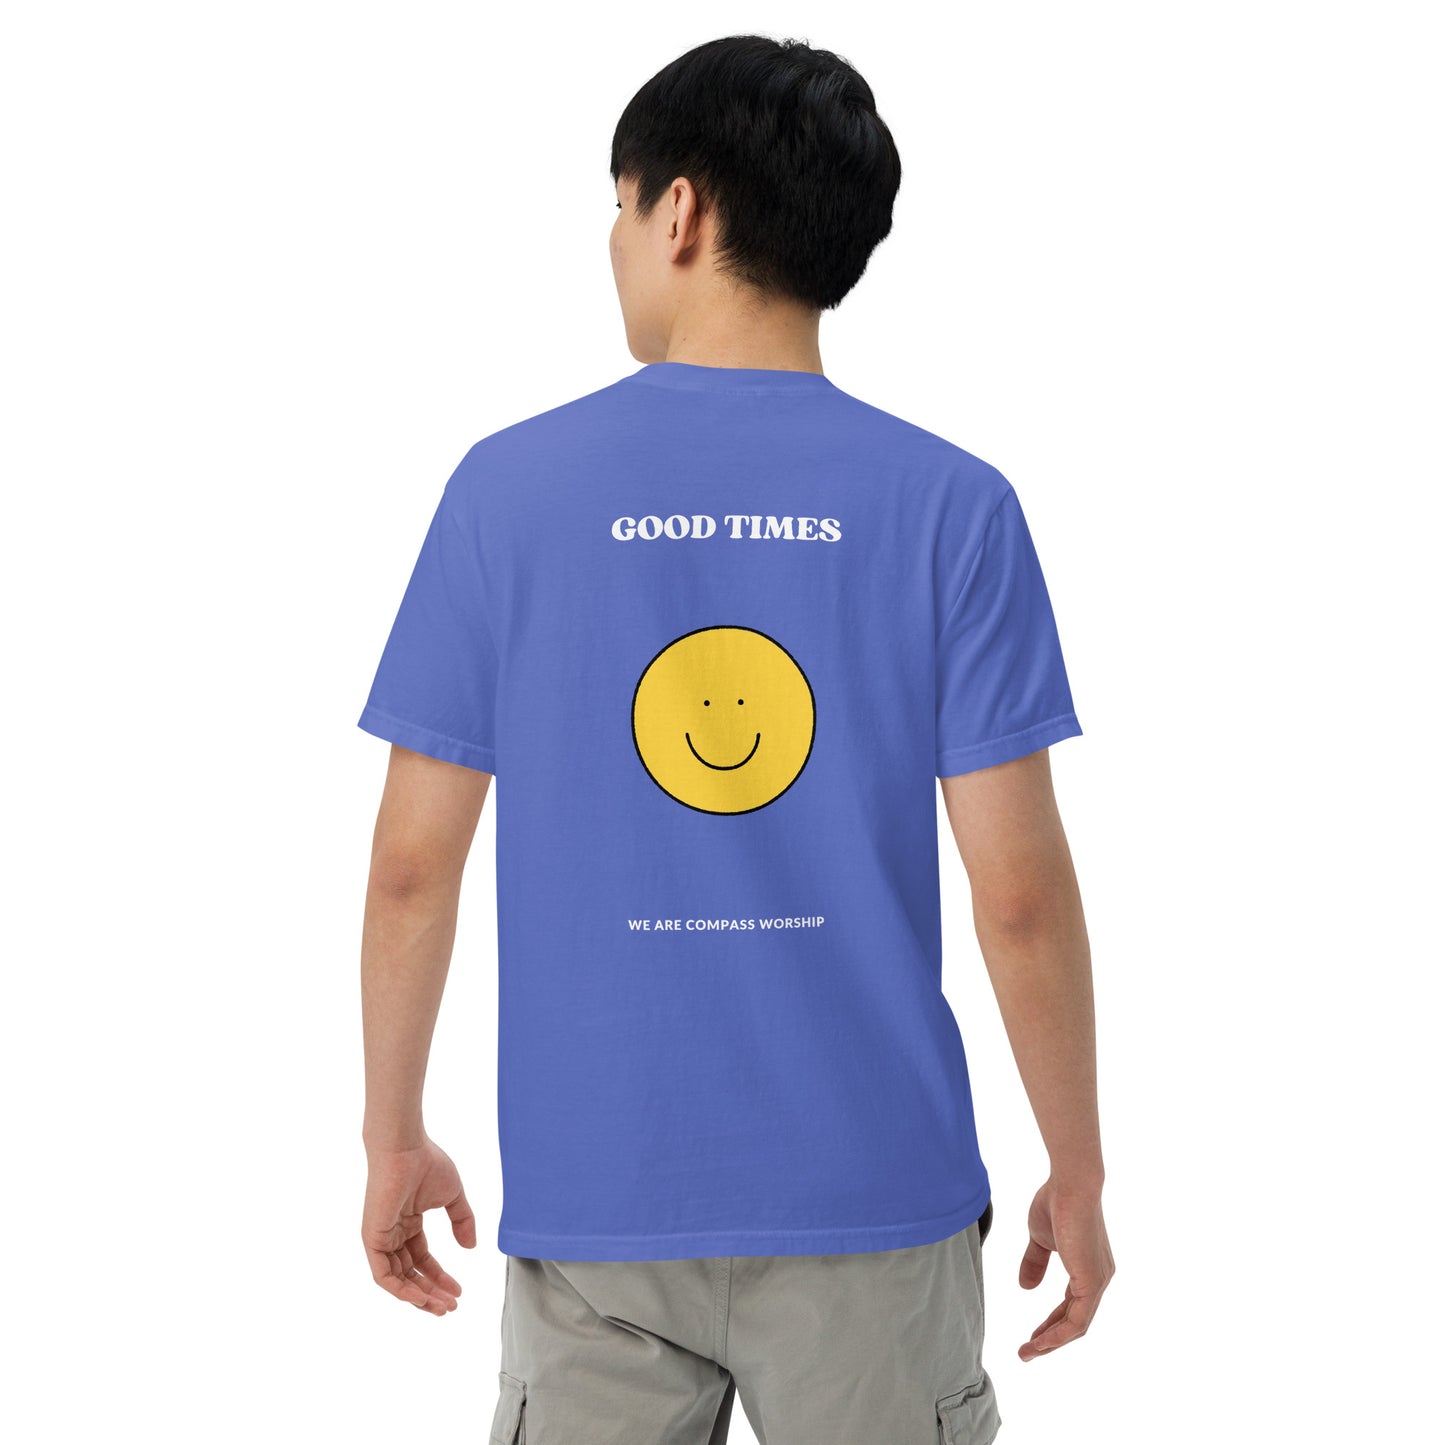 White Embroidered Praise! (Good Times) T-Shirt